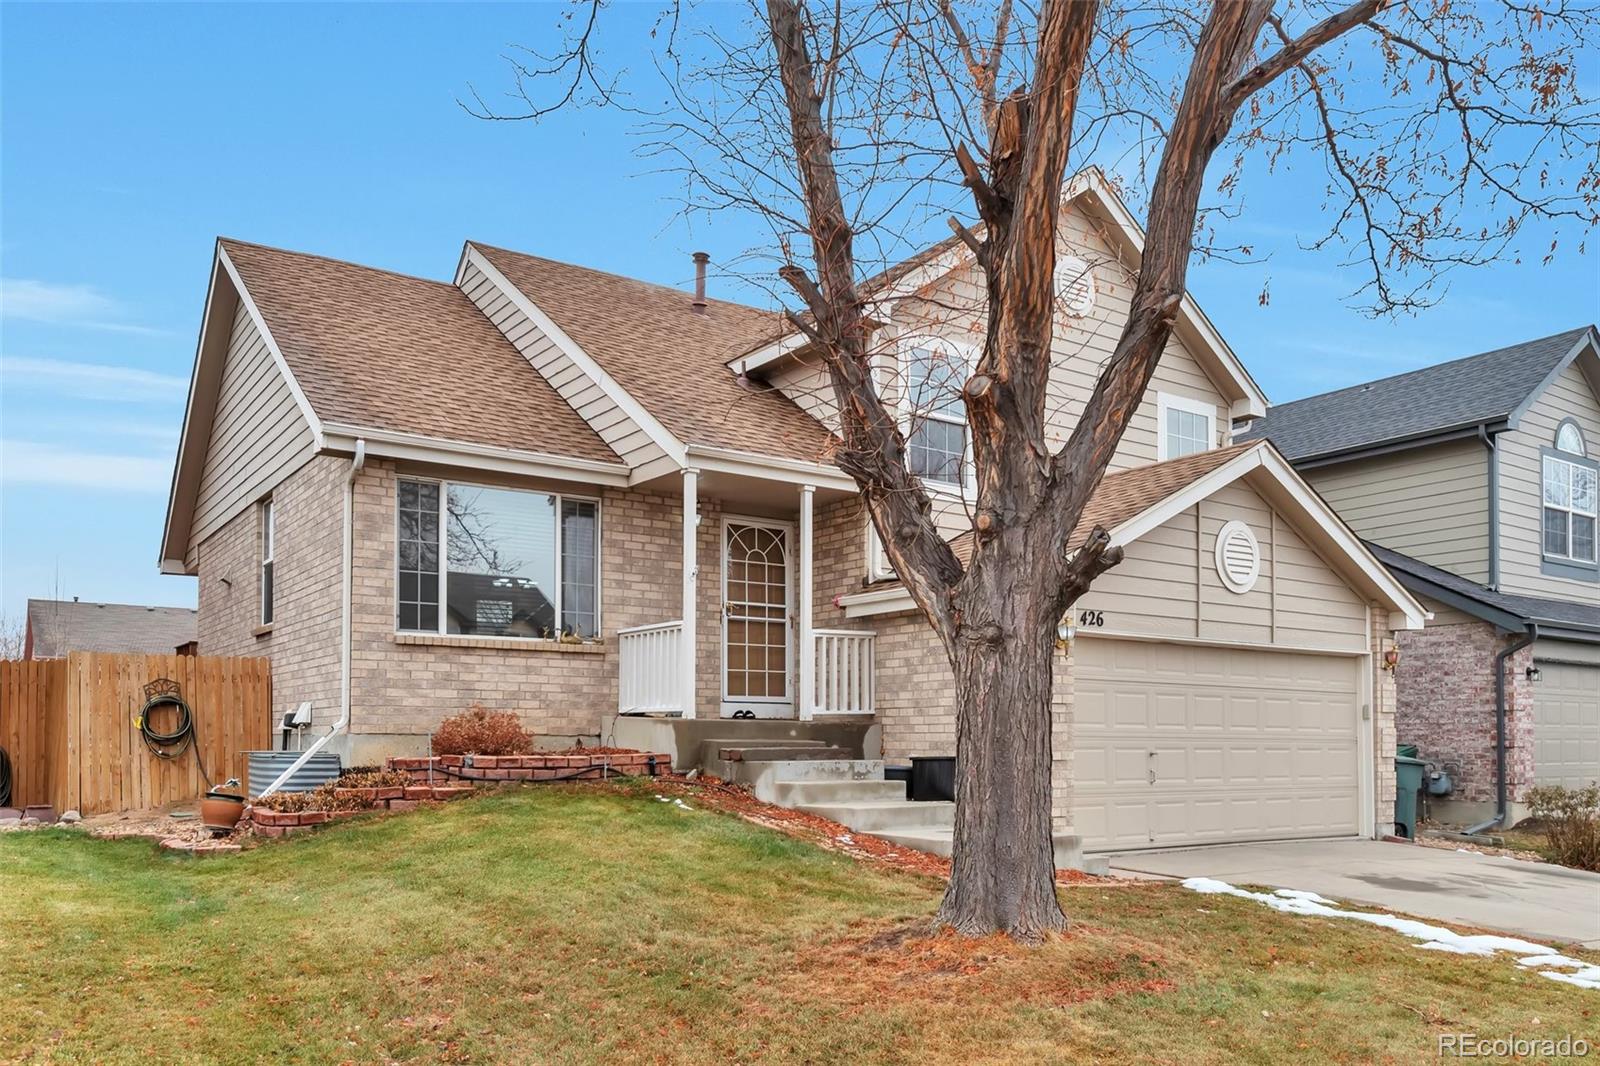 426 w 116th place, Northglenn sold home. Closed on 2024-02-29 for $520,000.